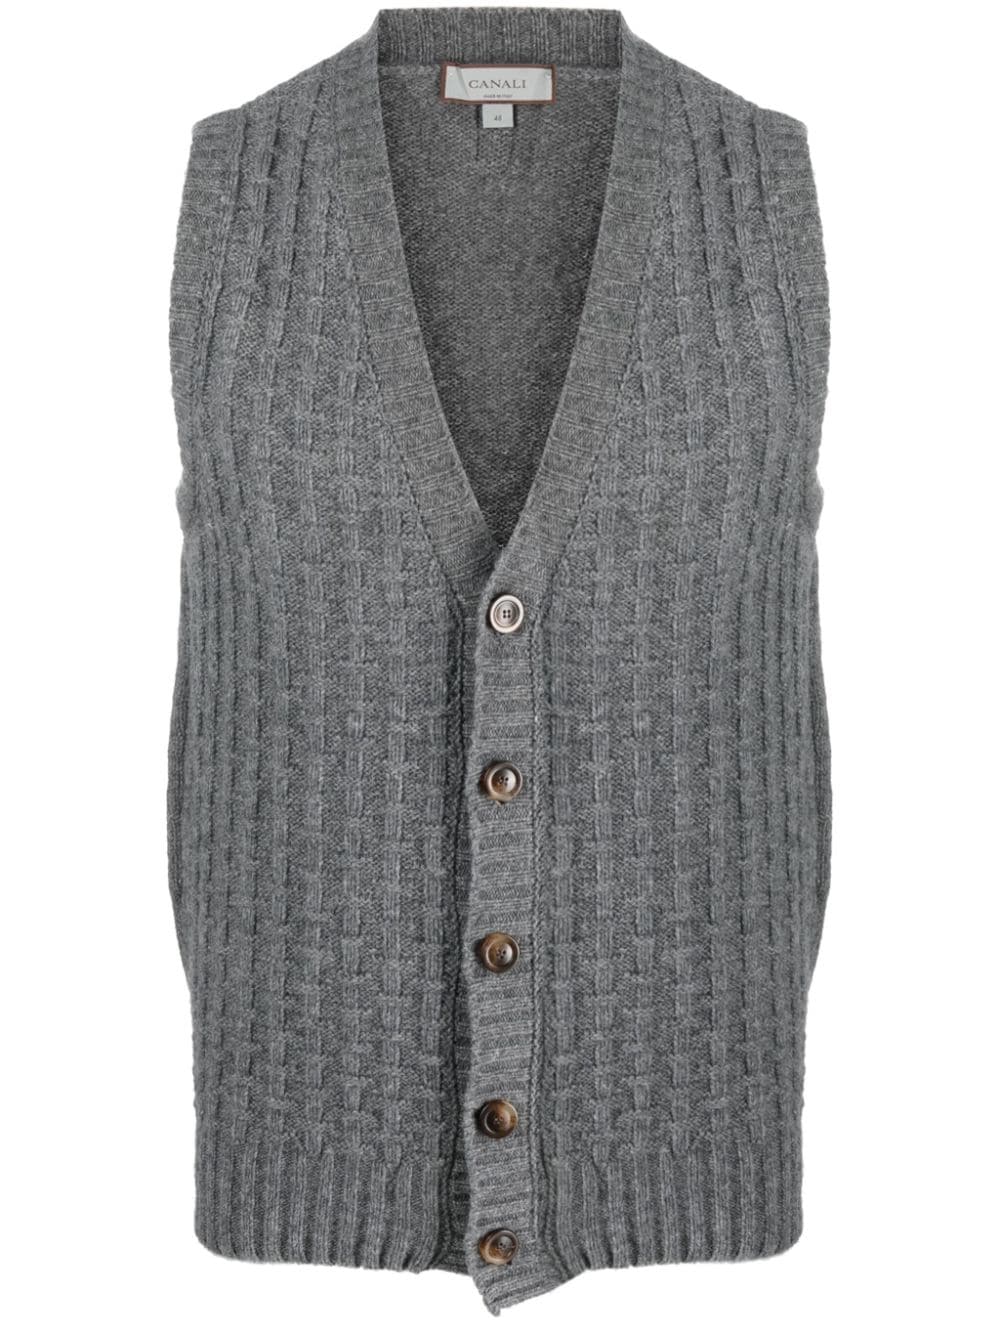 Canali ribbed wool-blend vest - Grigio